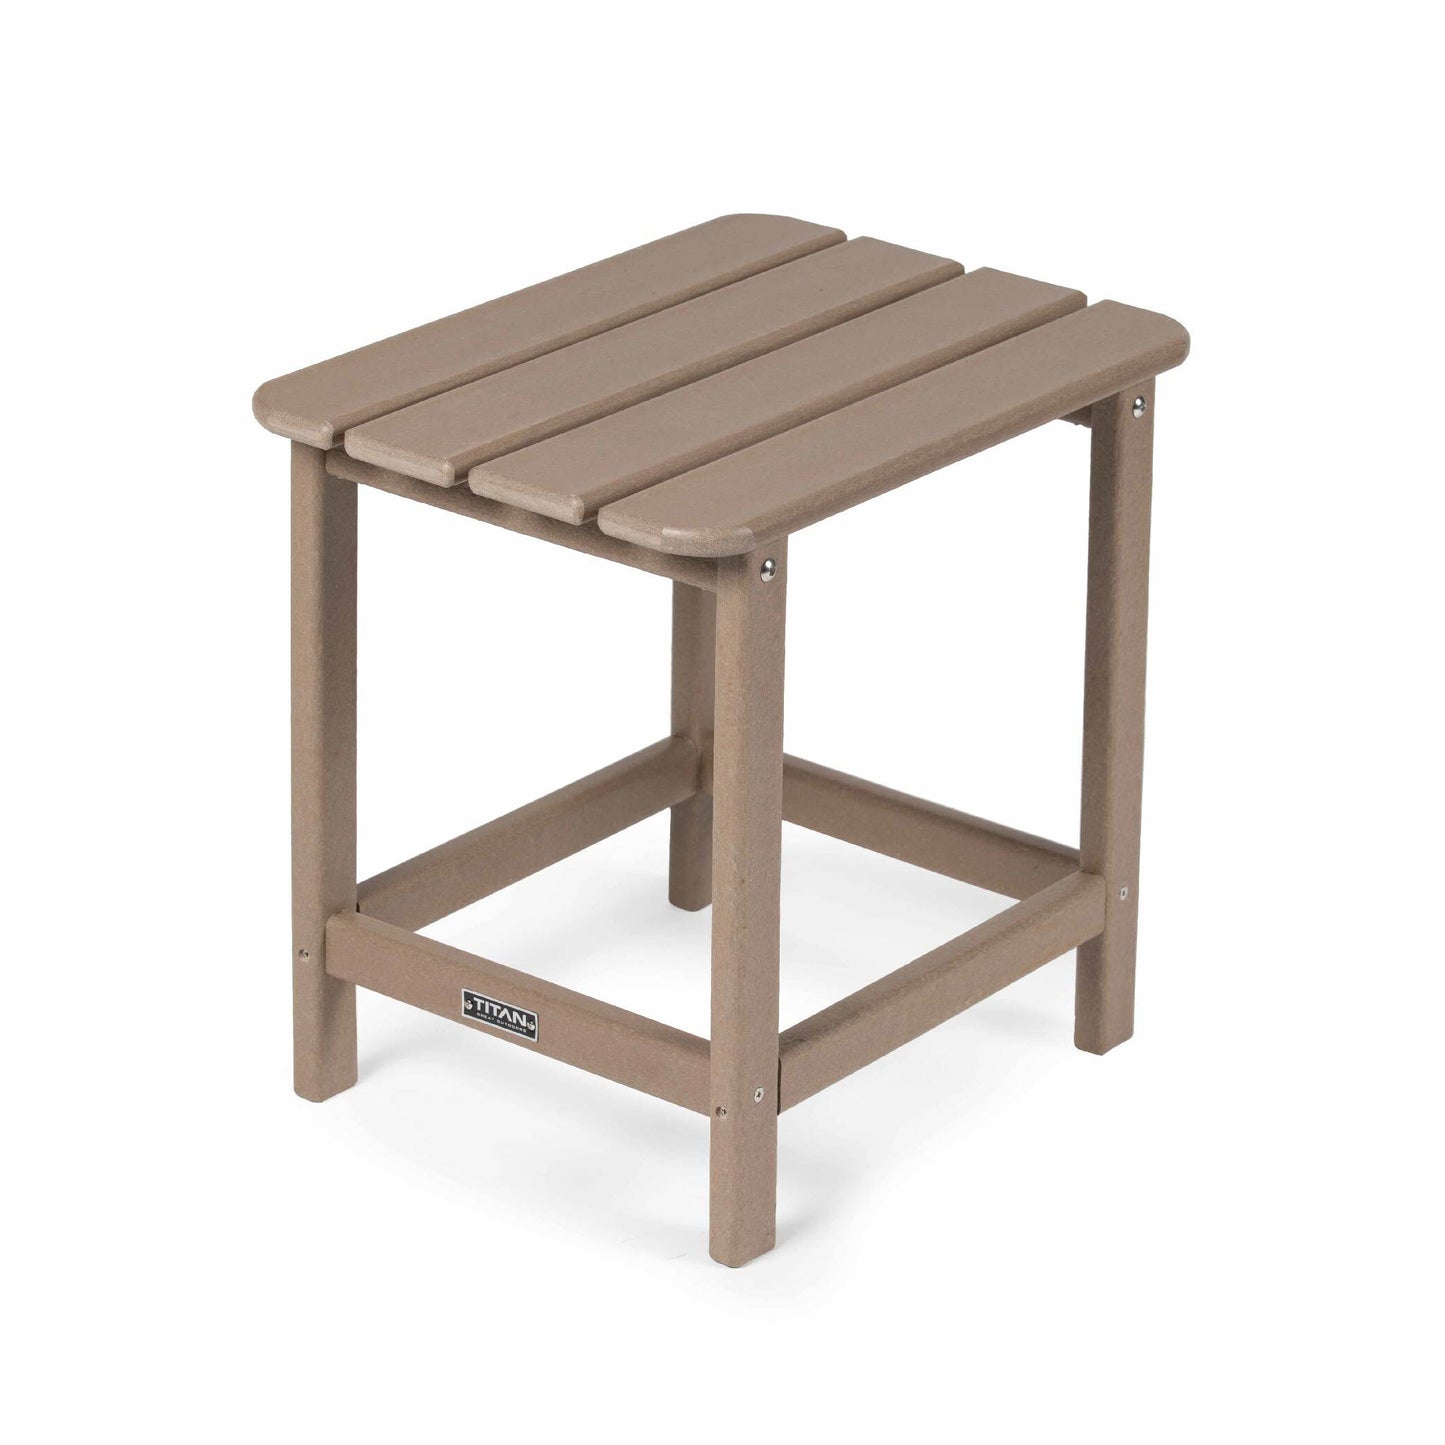 Everwood Hilltop Side Table - Table Color: Driftwood | Driftwood - view 1